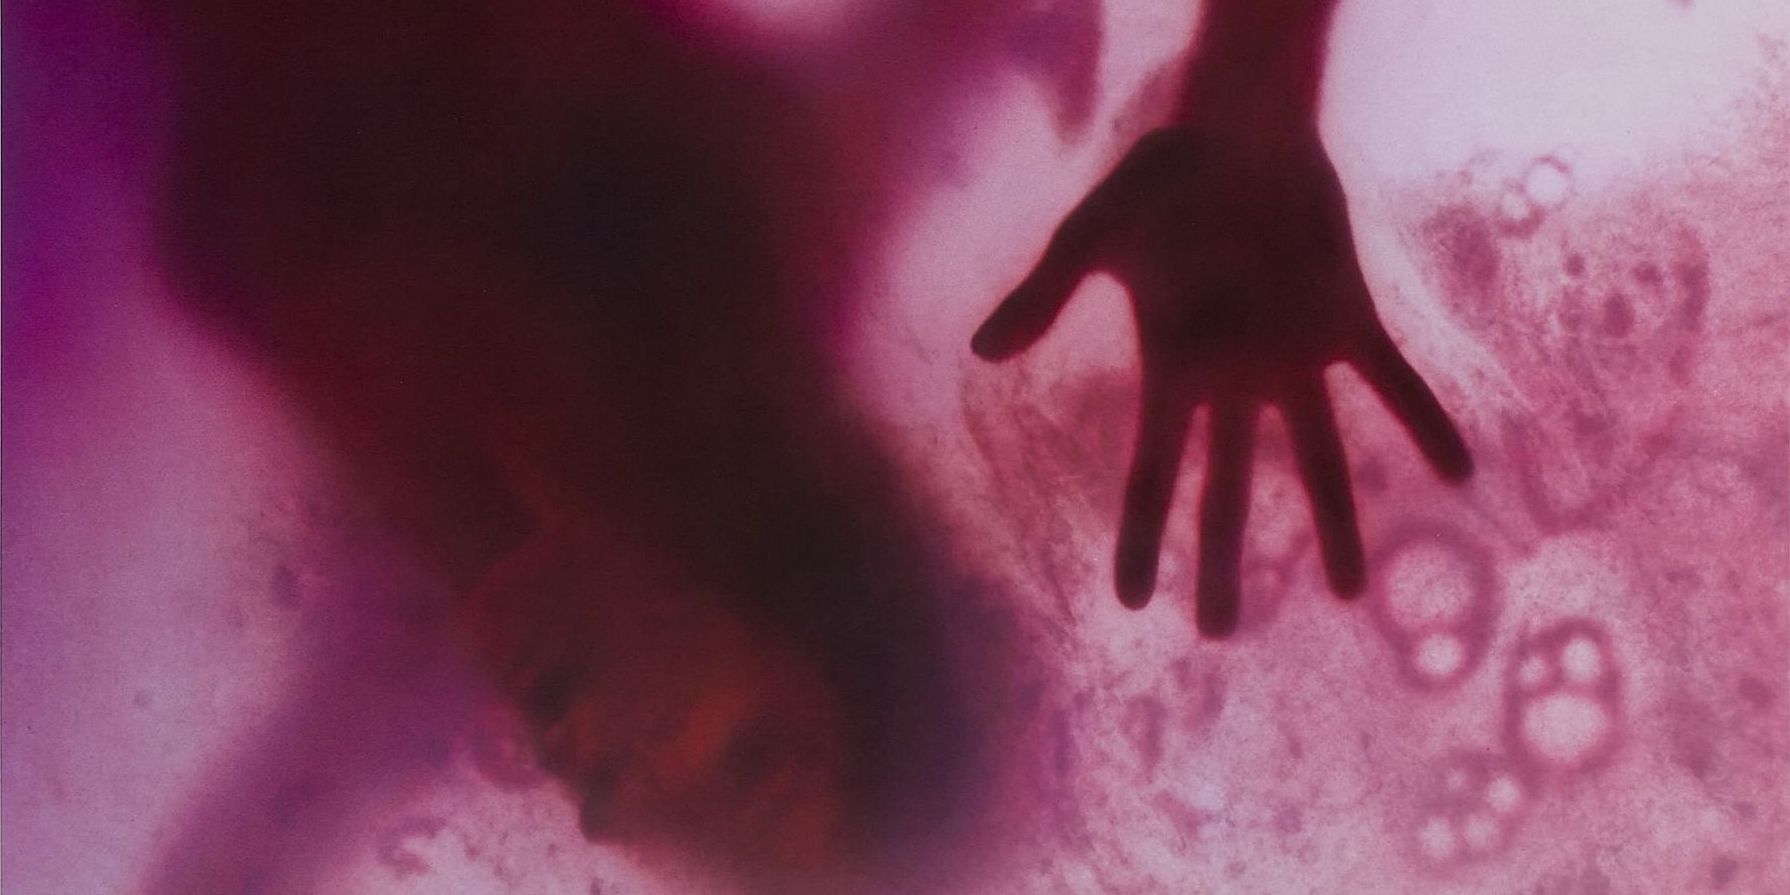 A cropped image of a person trapped within the Blob from the movie poster